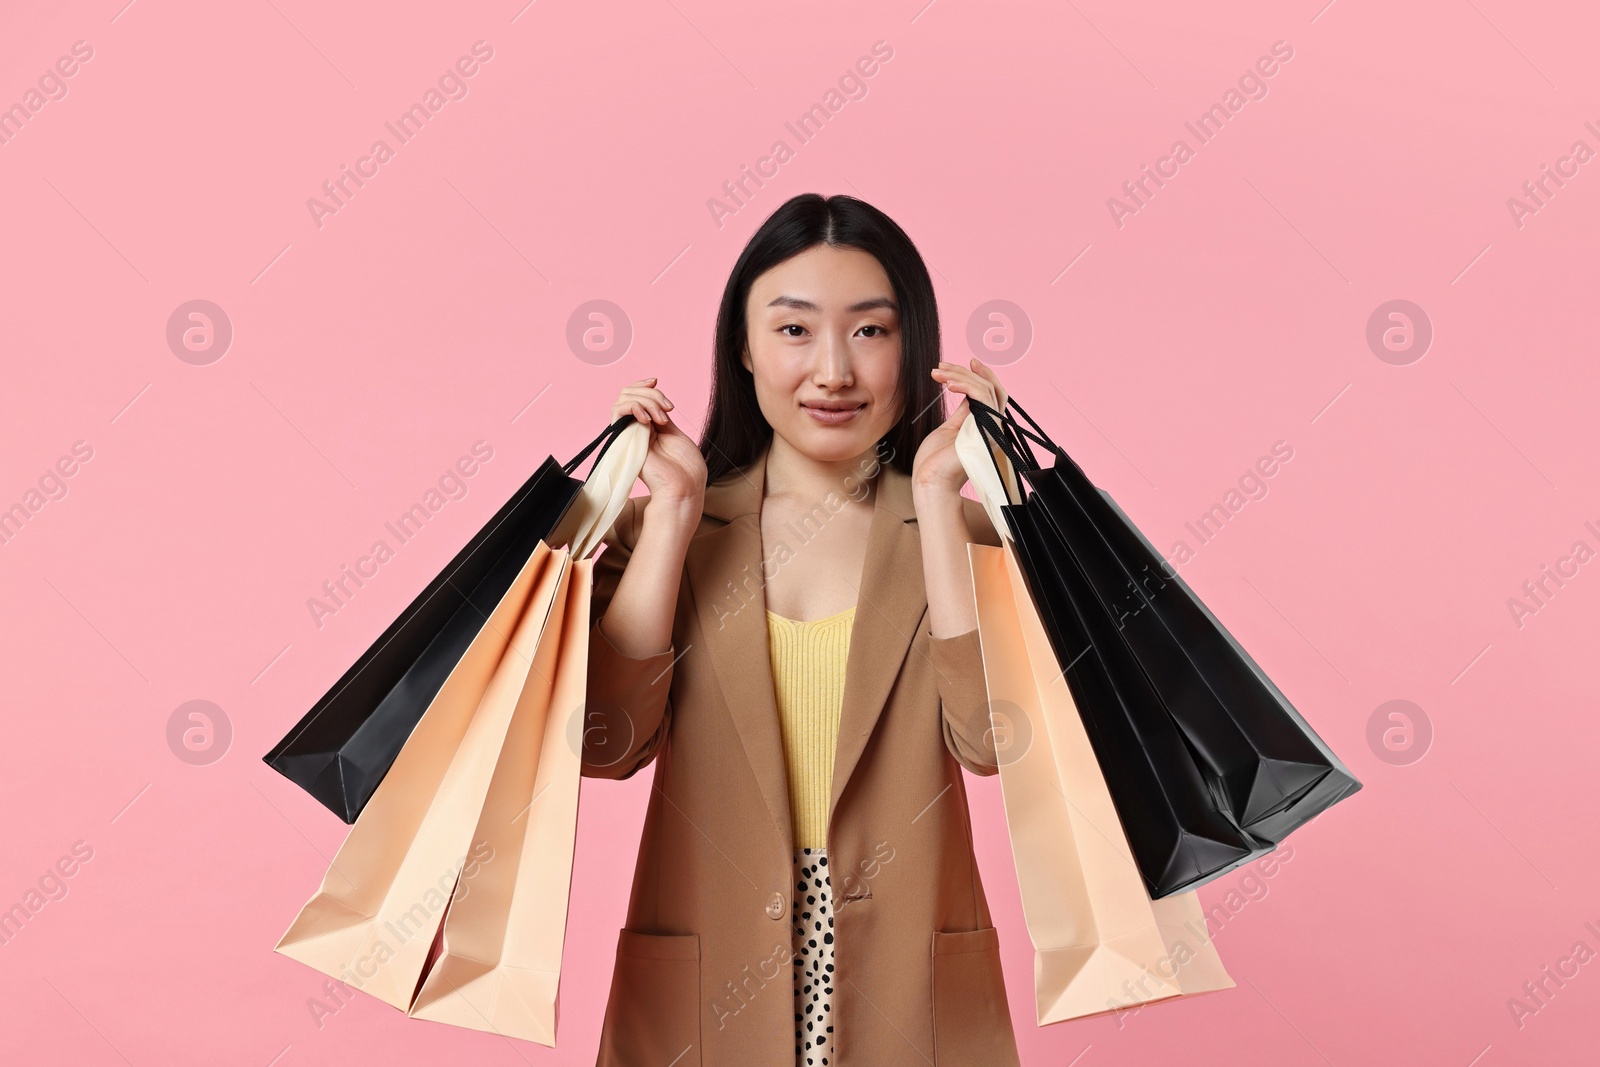 Photo of Beautiful woman with shopping bags on pink background